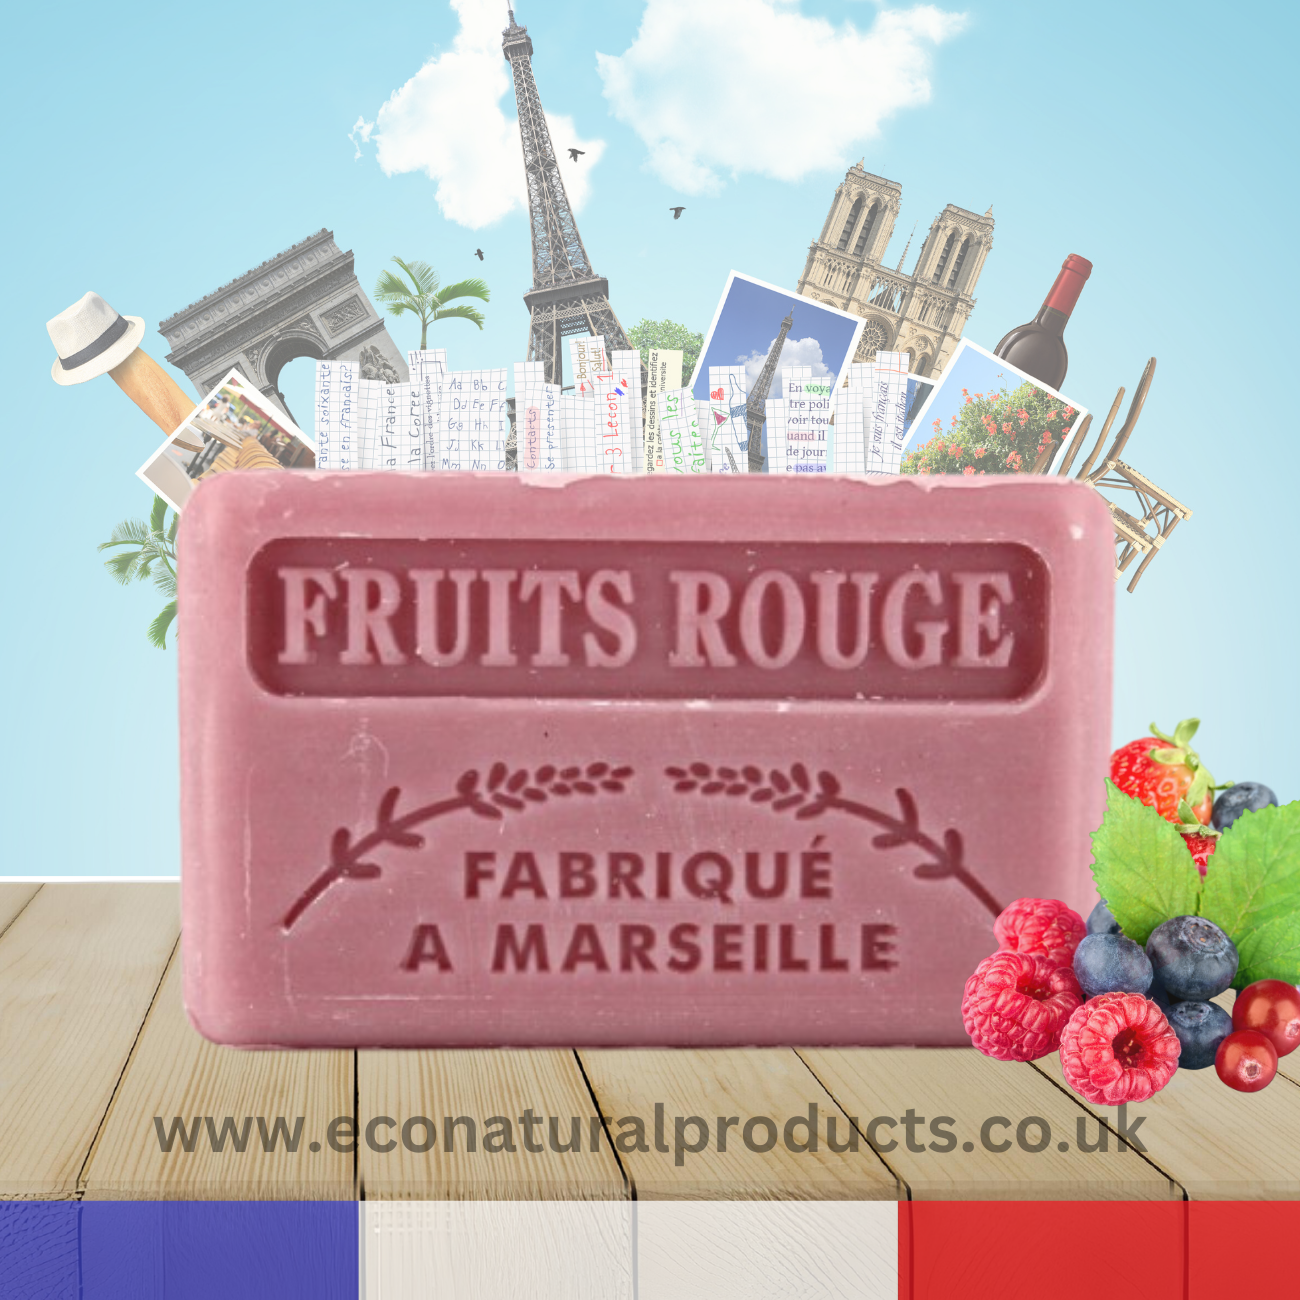 French Marseille Soap Fruits Rouge (Red Fruits) 125g